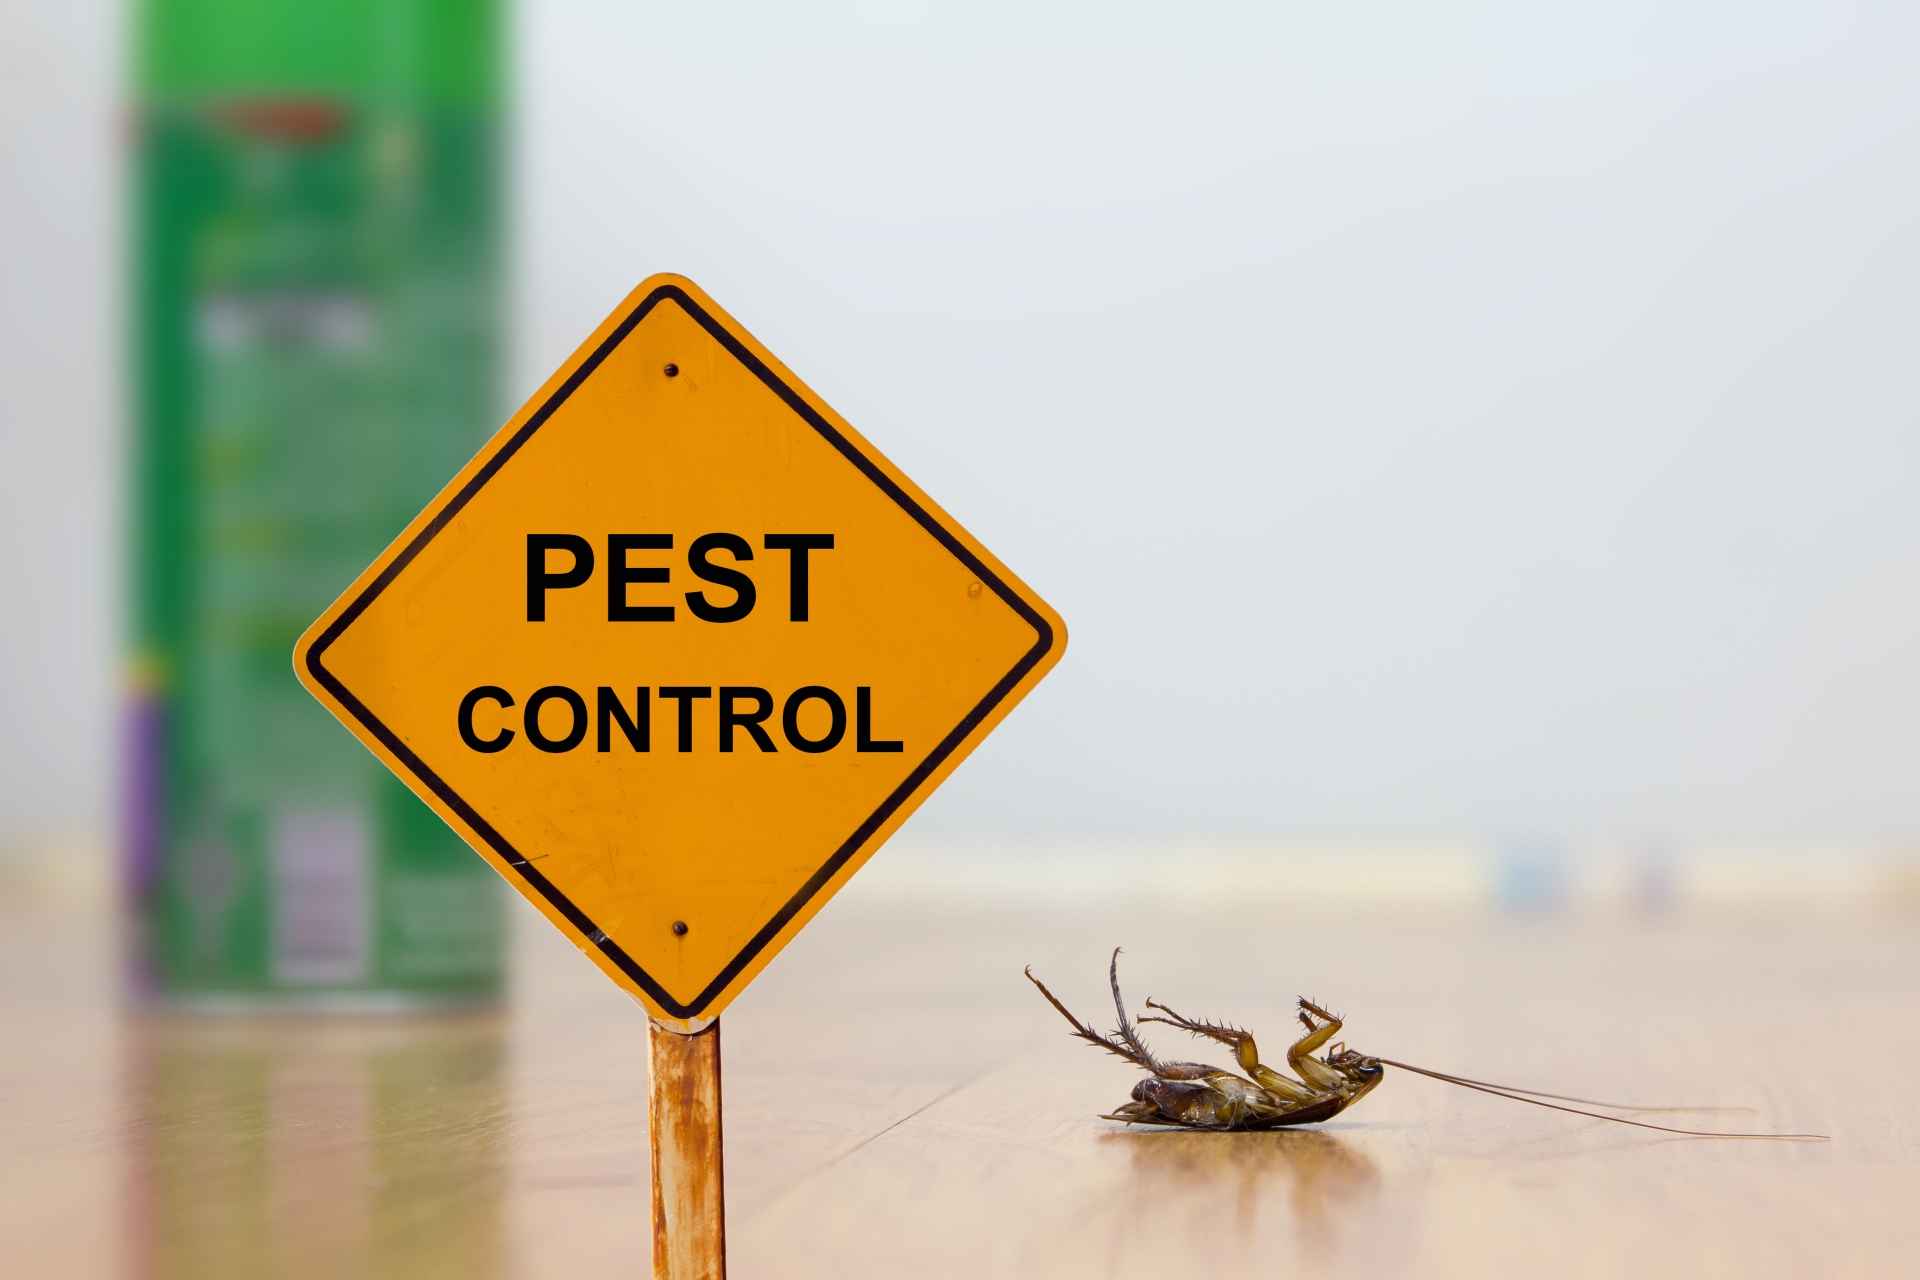 24 Hour Pest Control, Pest Control in Radlett, Shenley, WD7. Call Now 020 8166 9746